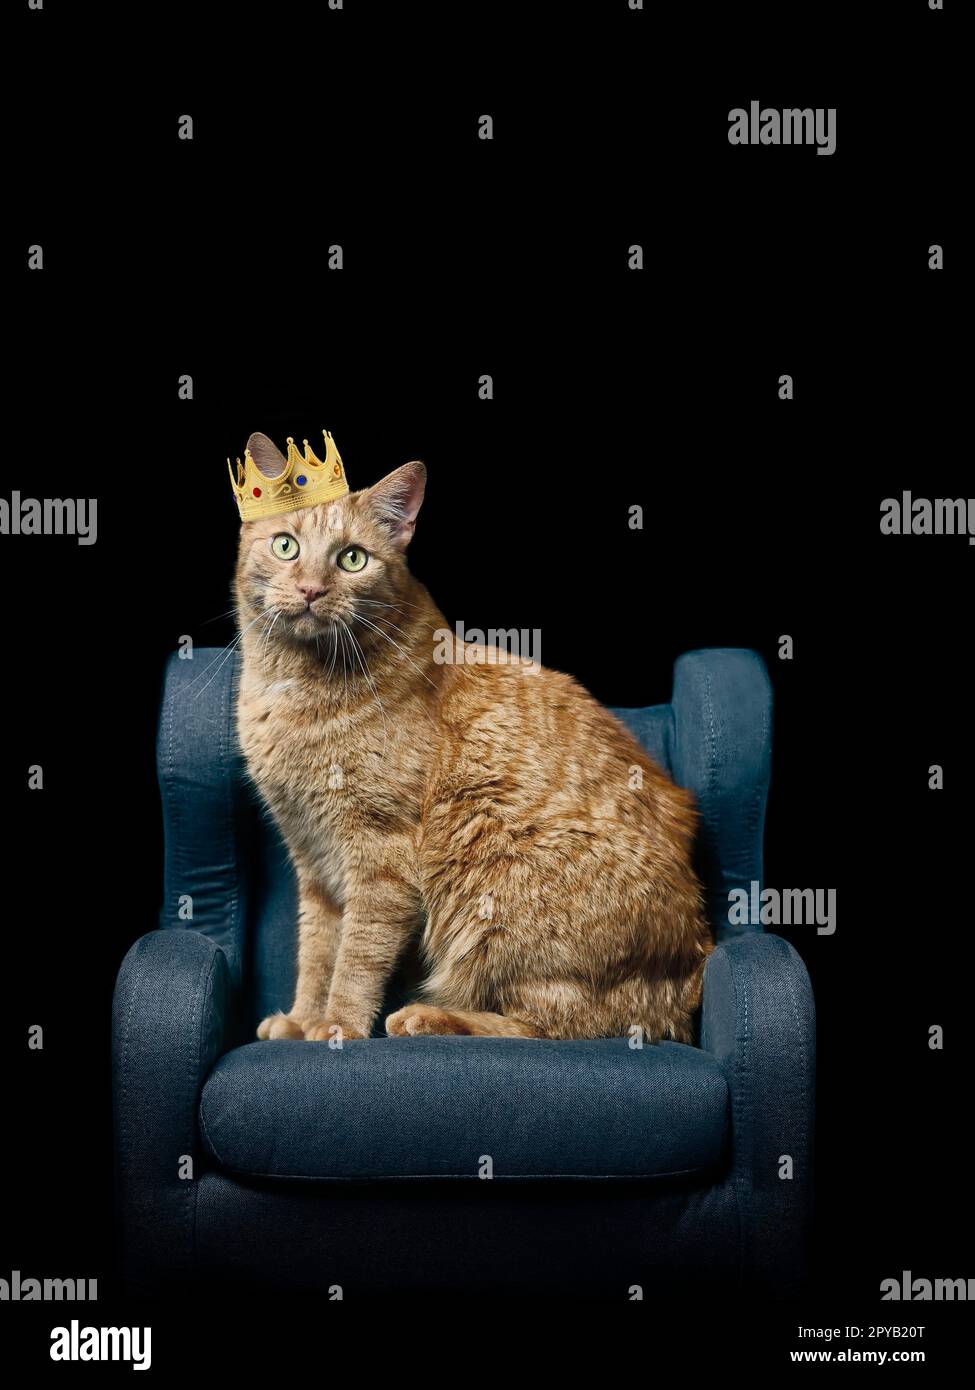 Cute ginger cat sitting on armchair and wearing a golden crown, isolated on black background with copy space. Stock Photo